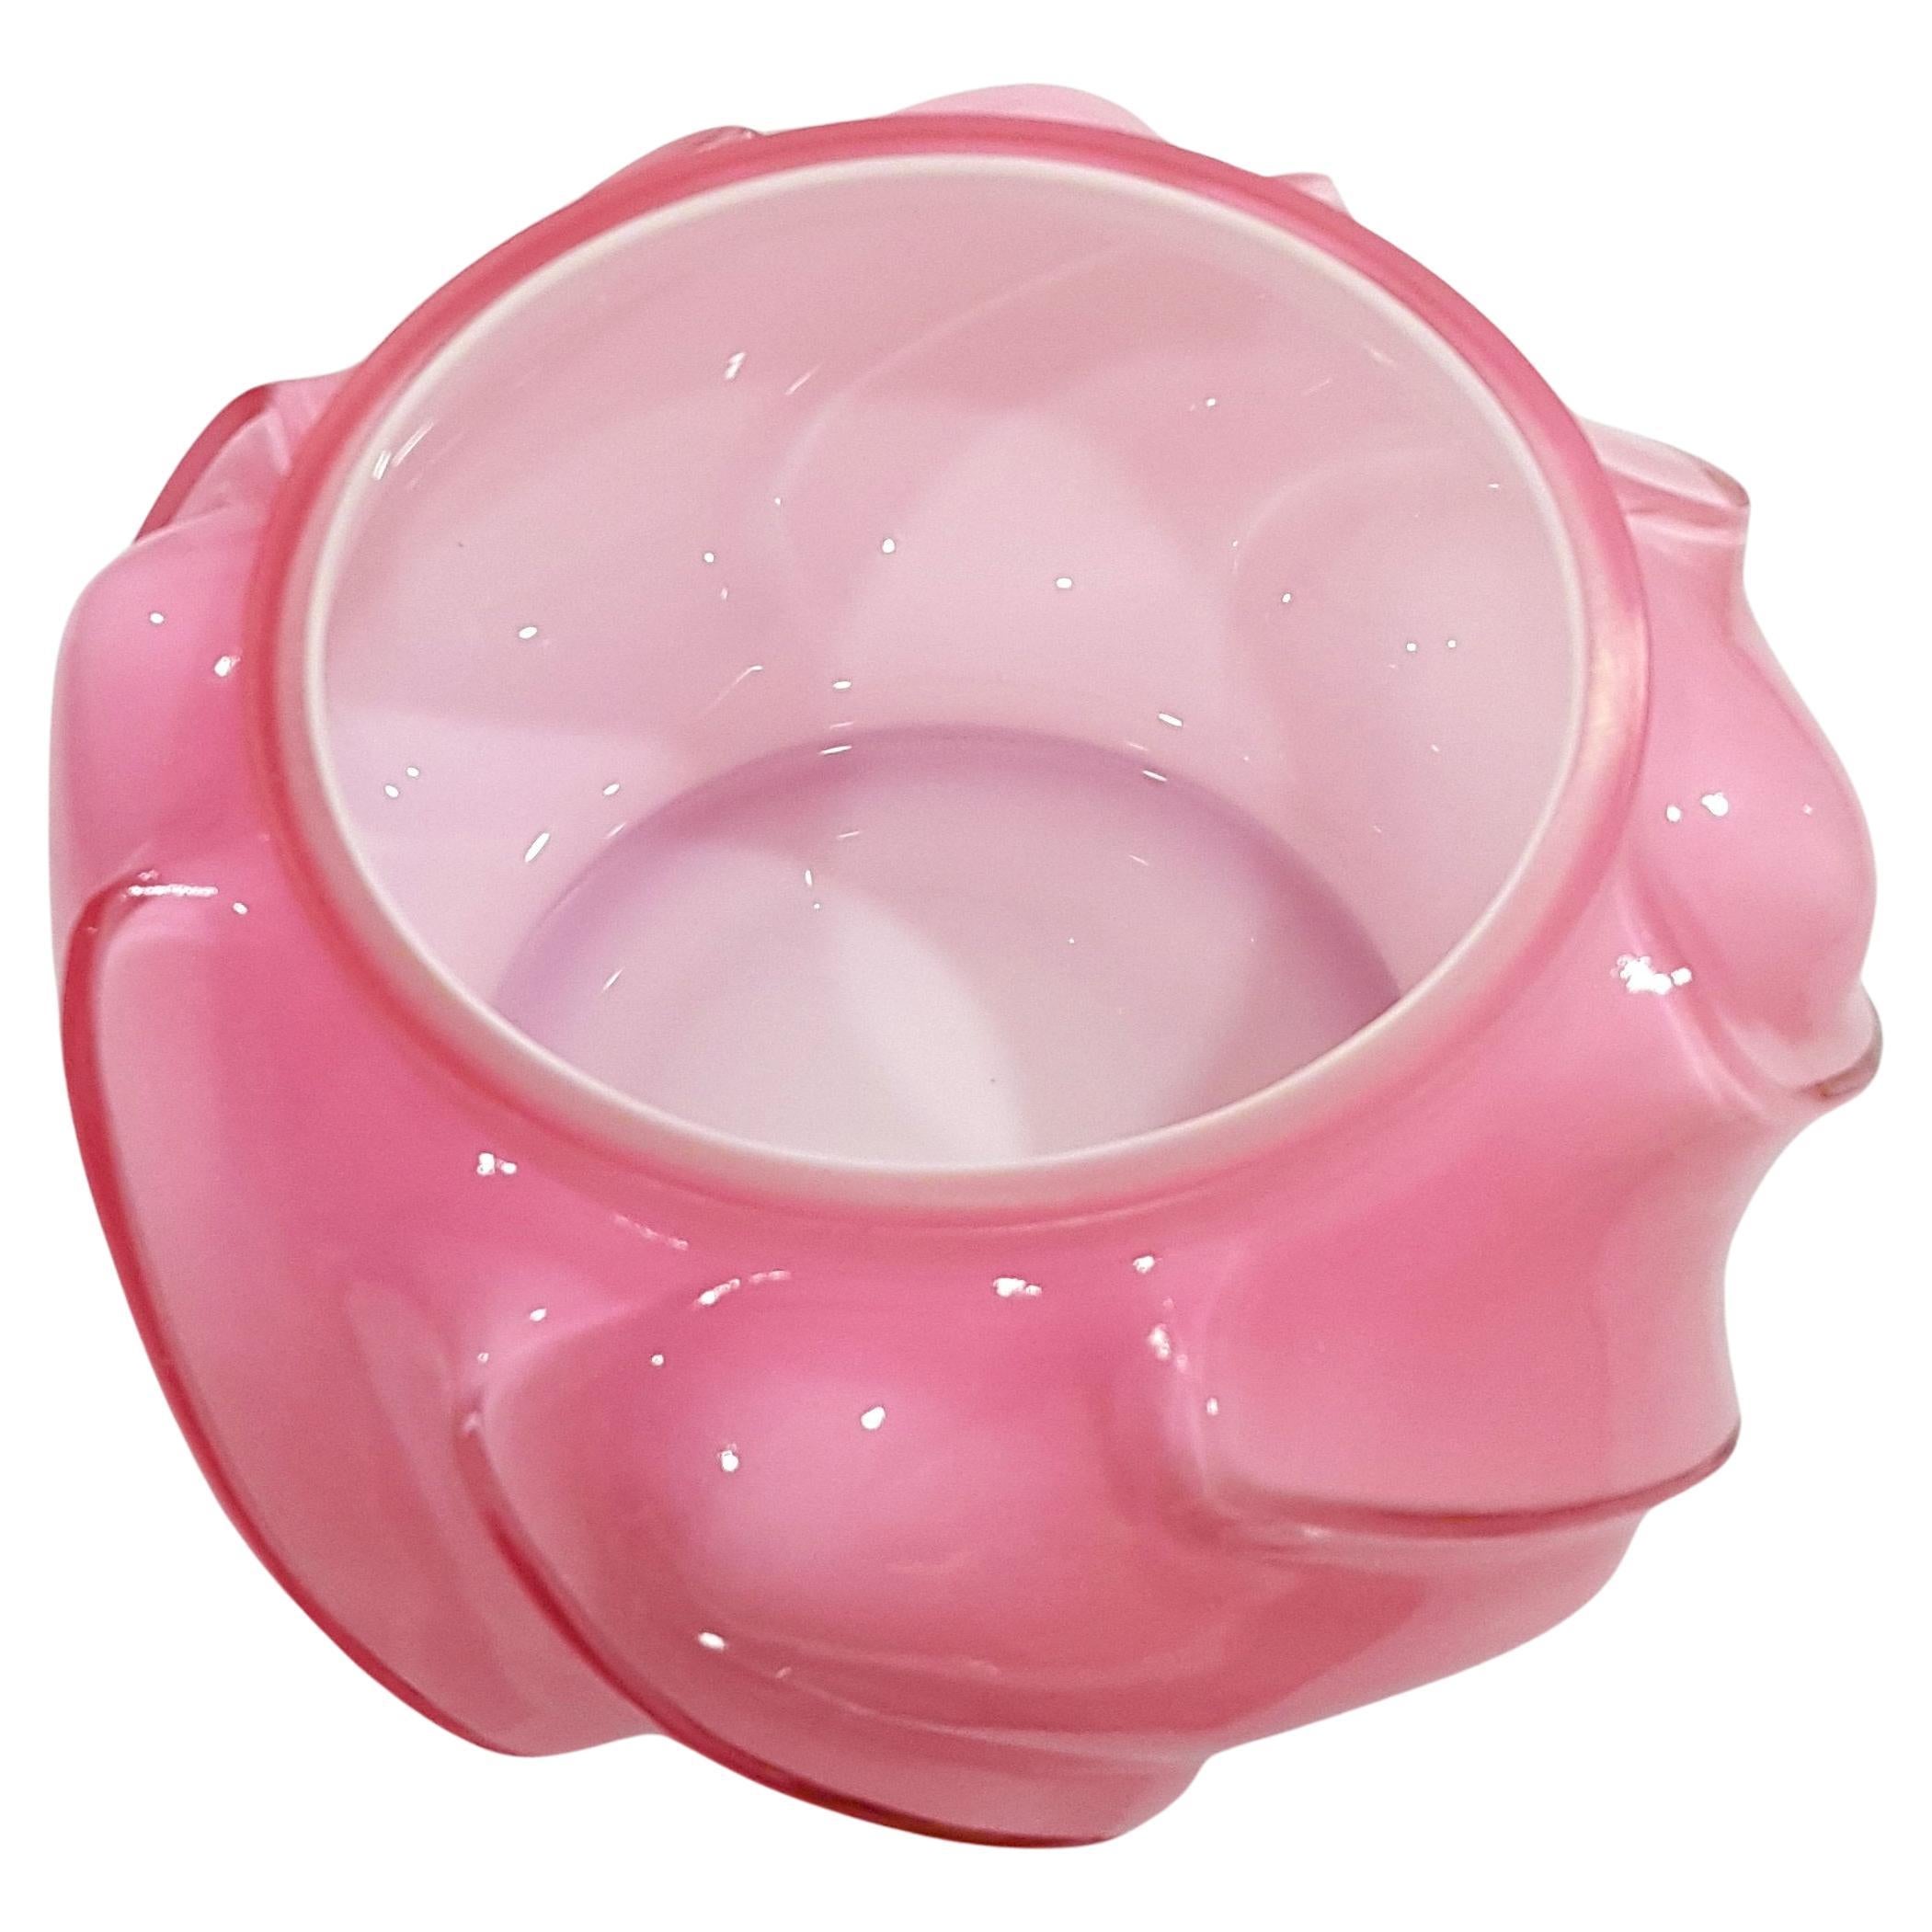 Fenton cased glass bowl, beautiful pink exterior, white interior For Sale